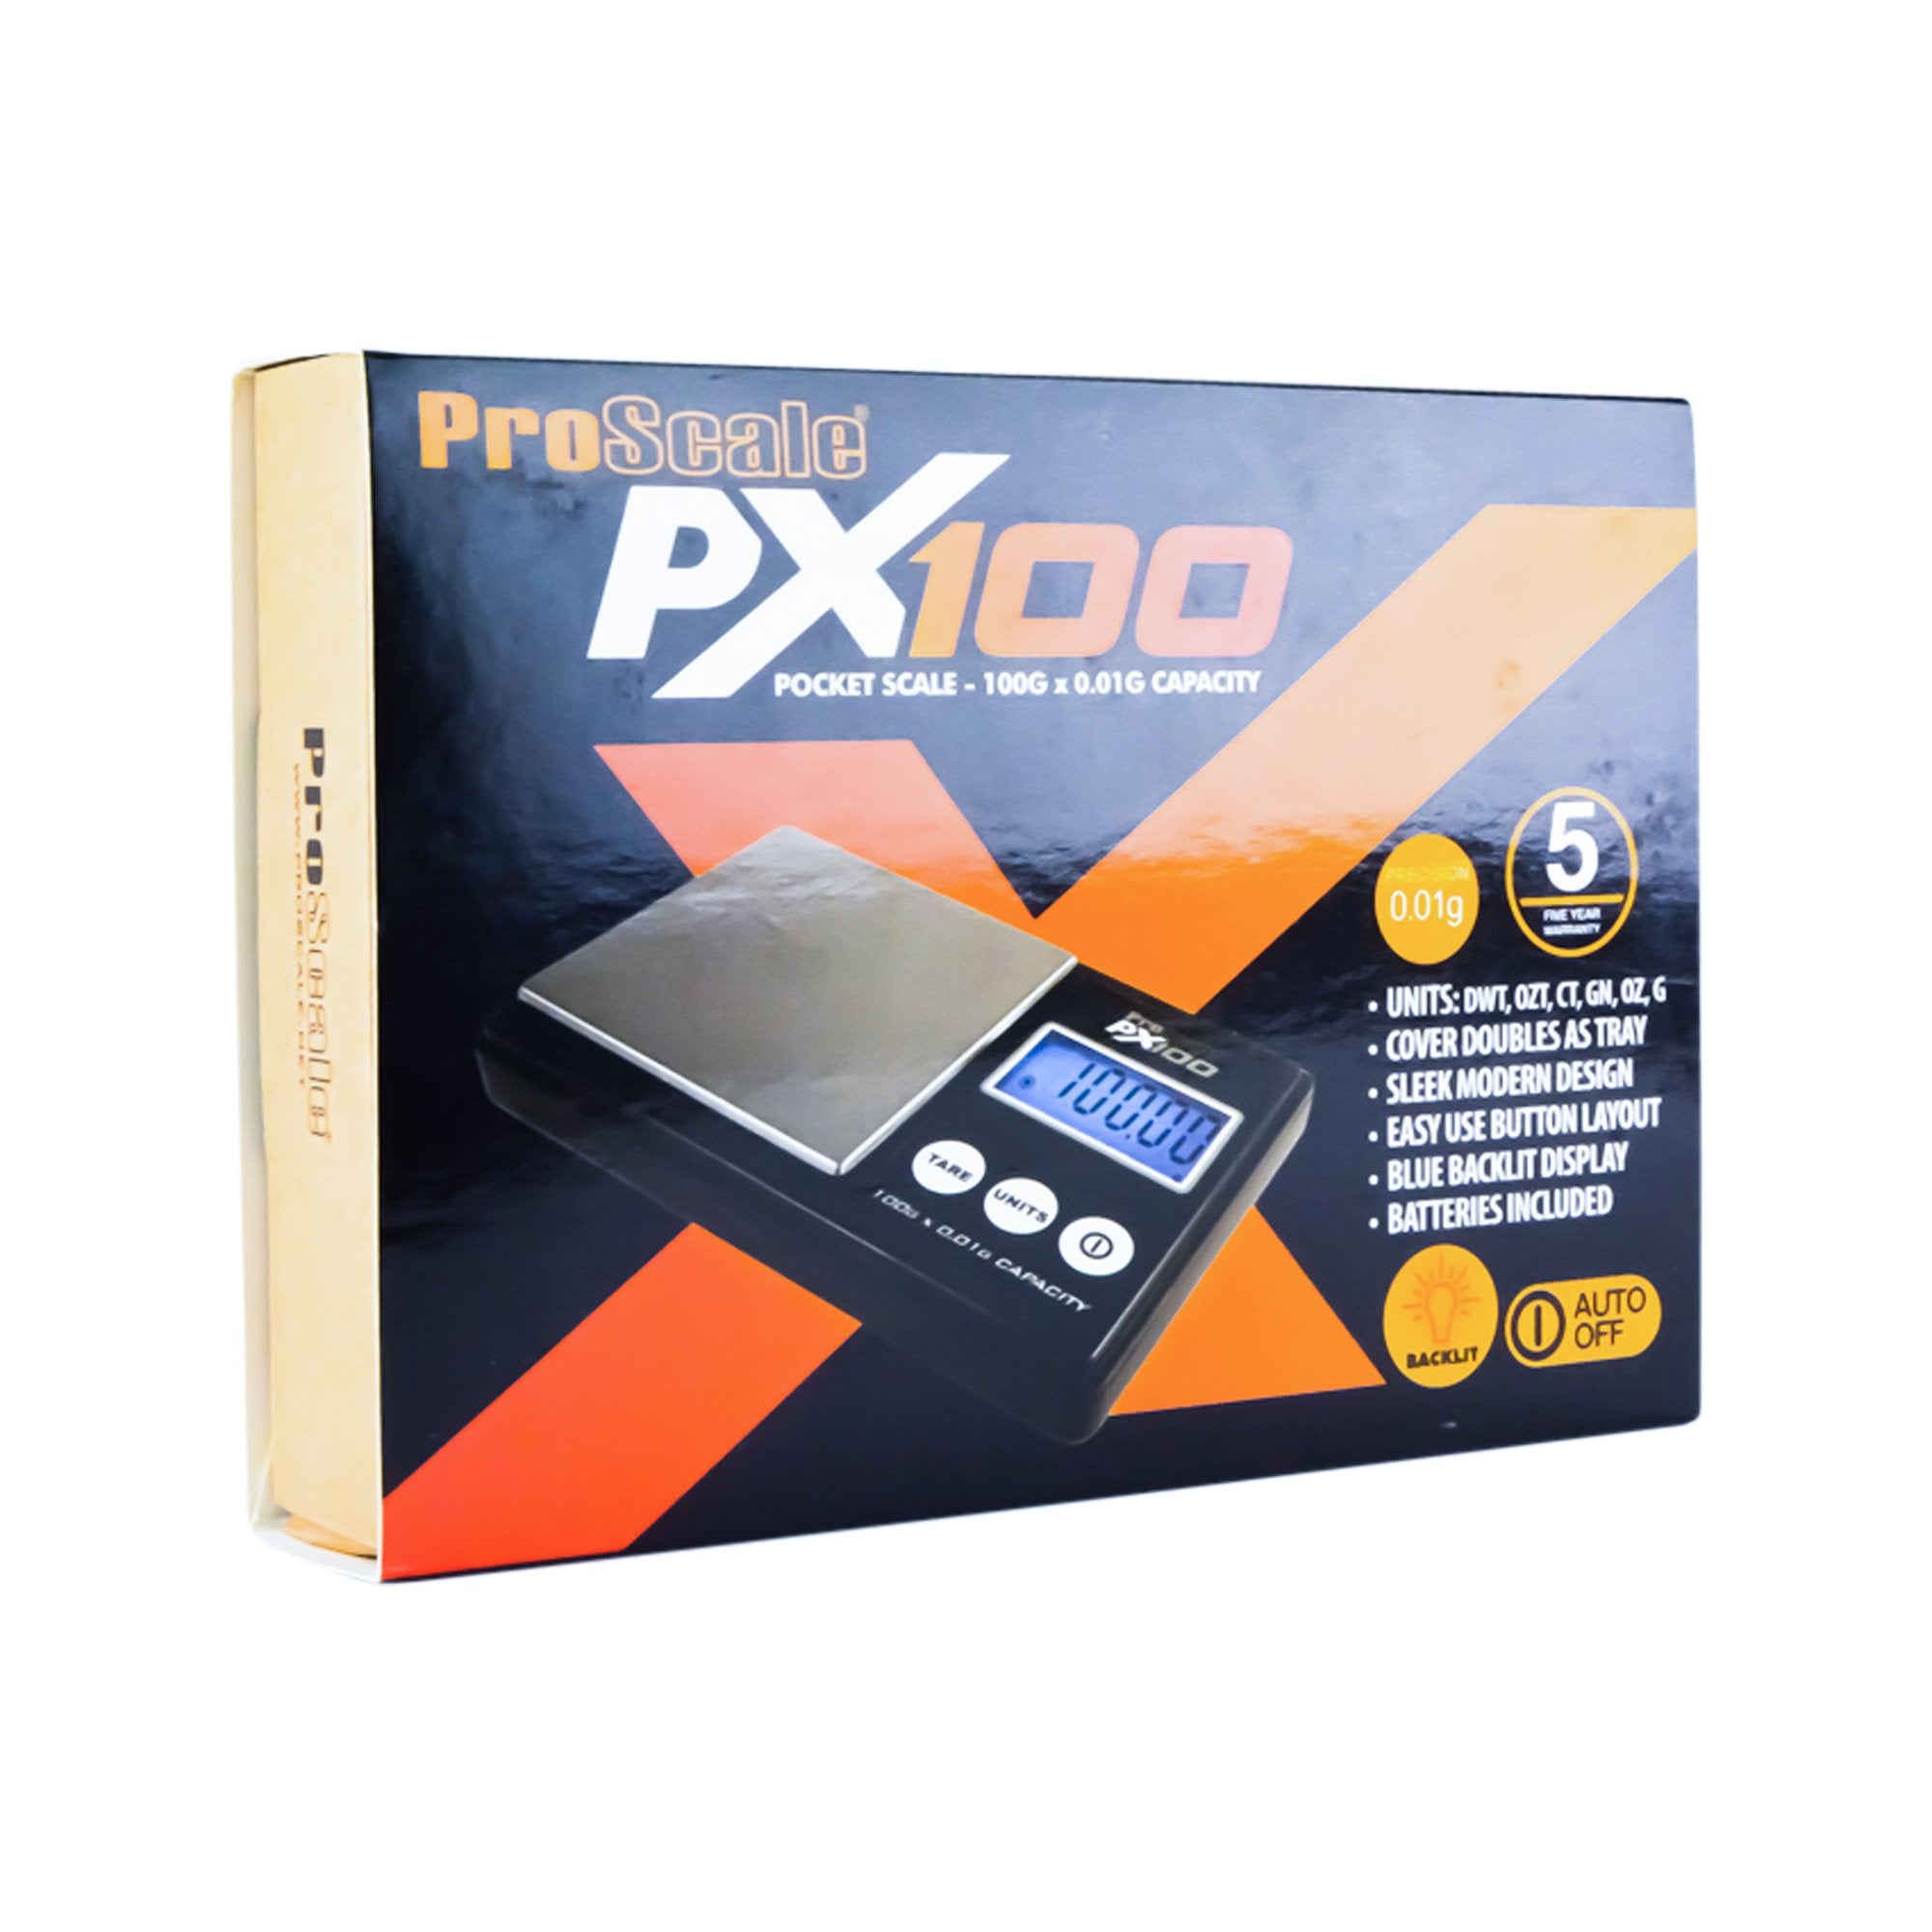 PRO SCALE | PX100 Digital Scale | 100g Capacity - 0.01g Readability - 5